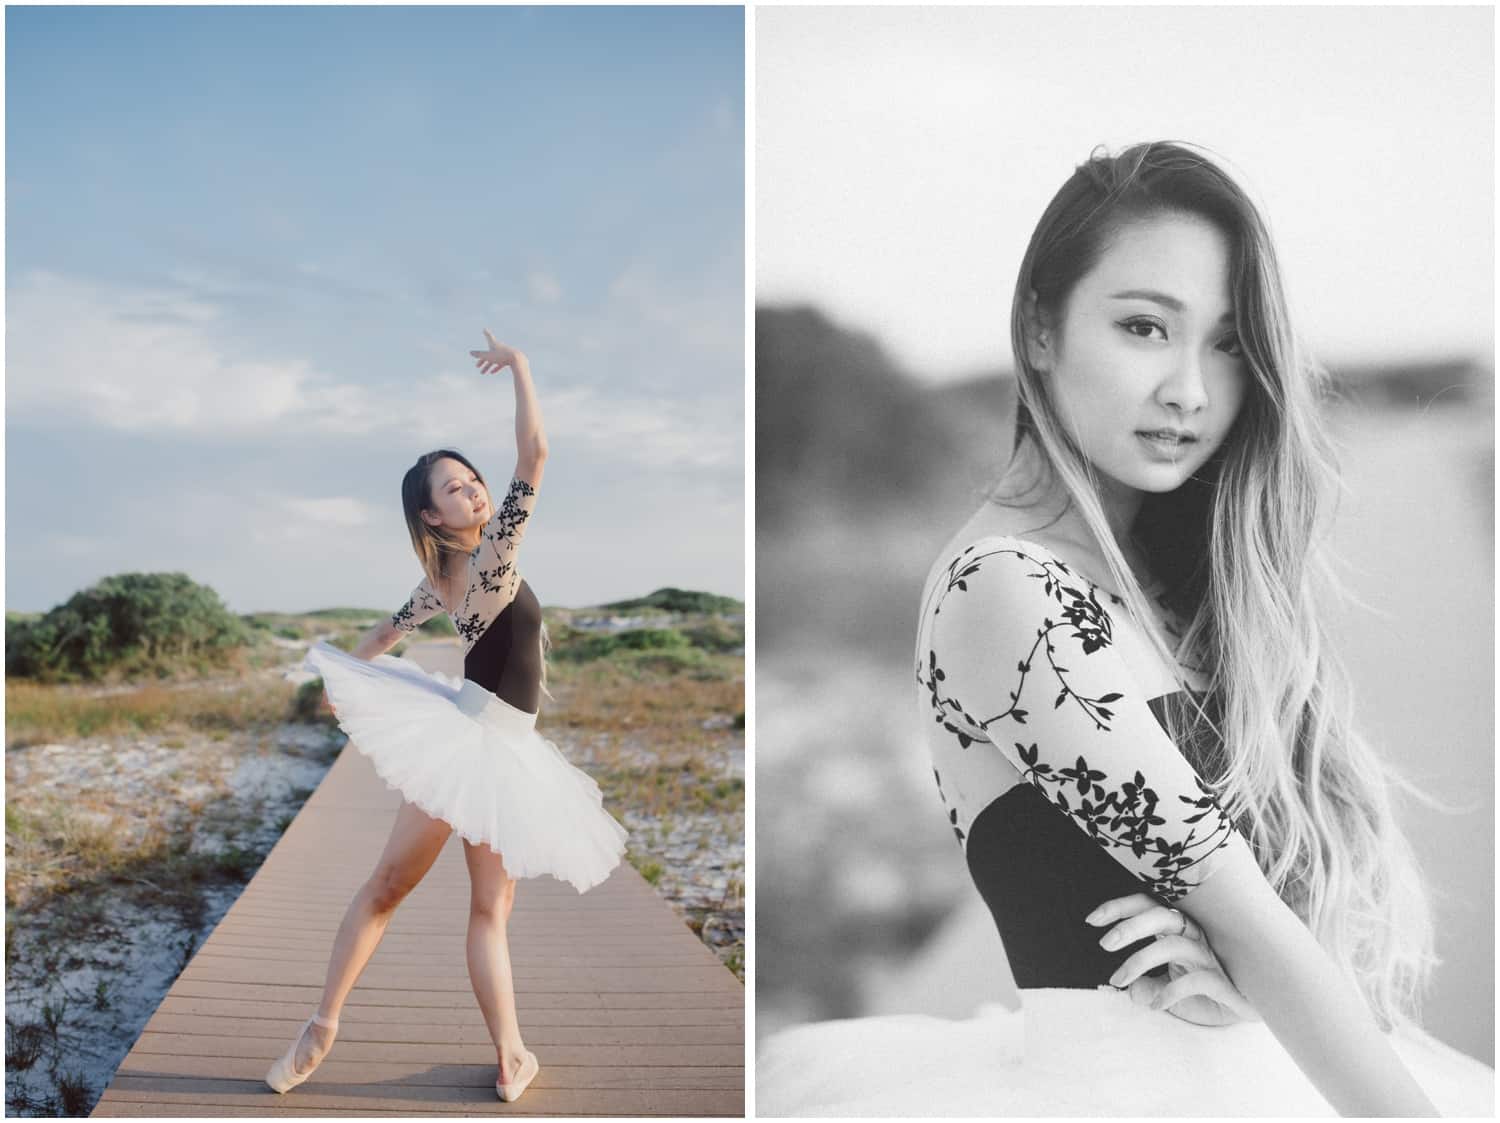 Dance Photography Poses